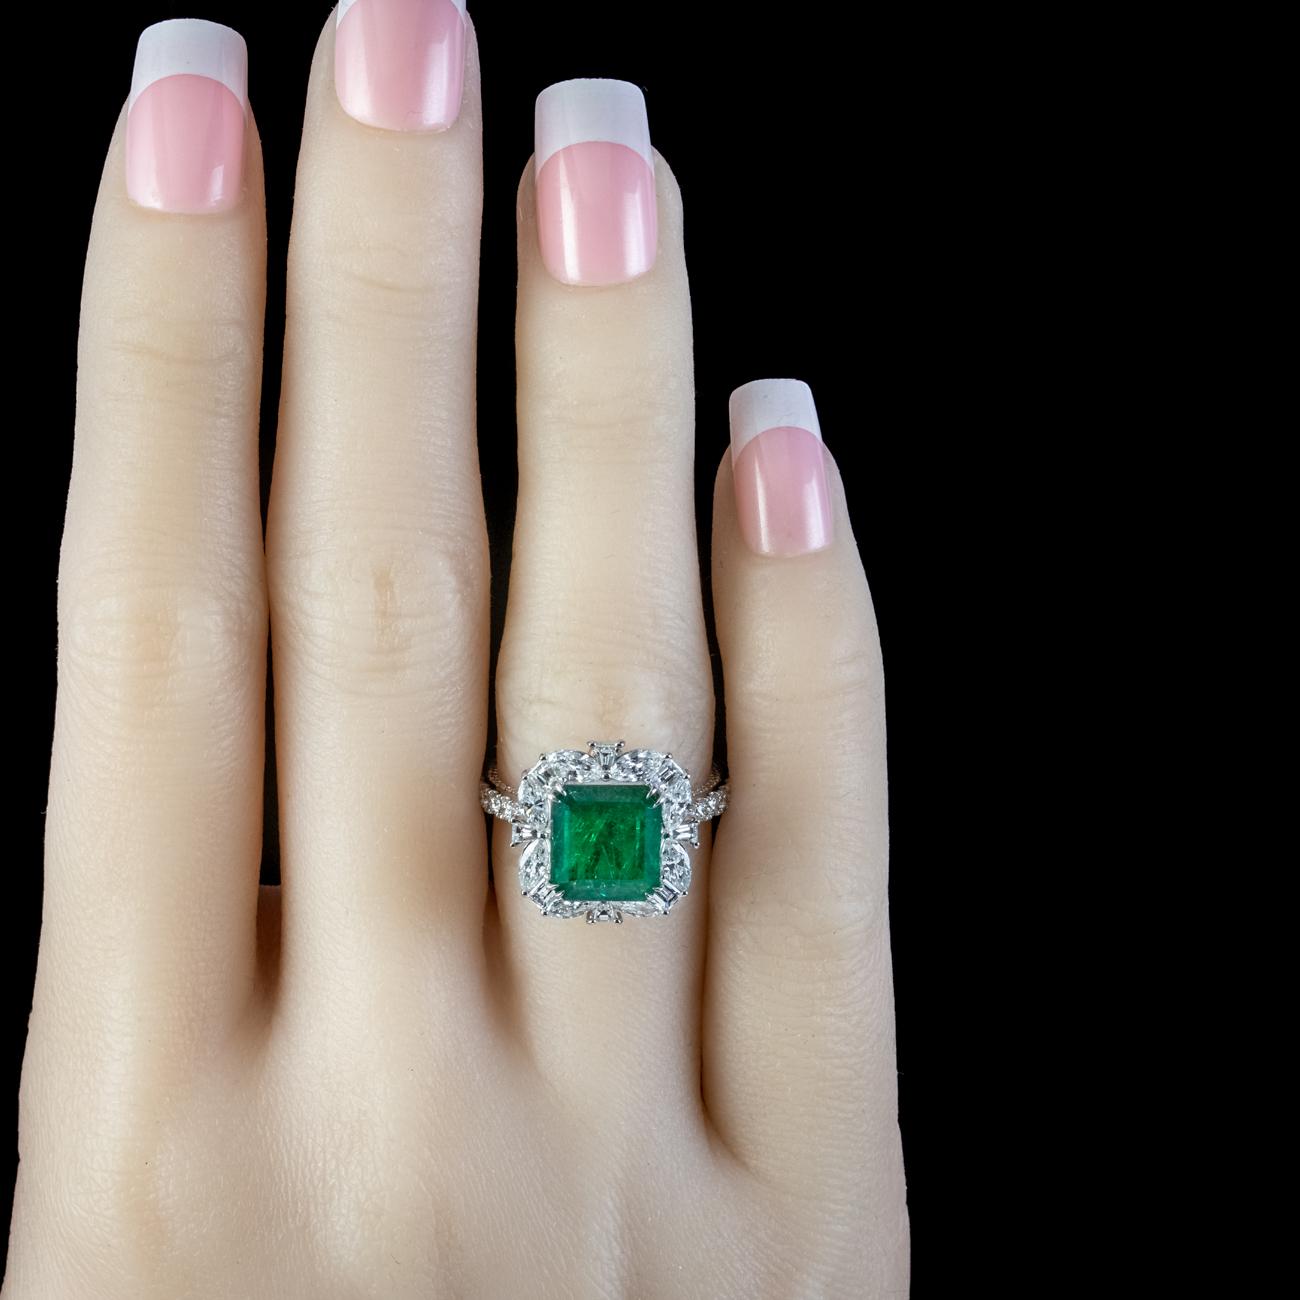 Women's Vintage Emerald Diamond Cluster Ring 3.11ct Natural Brazilian Emerald with Cert For Sale